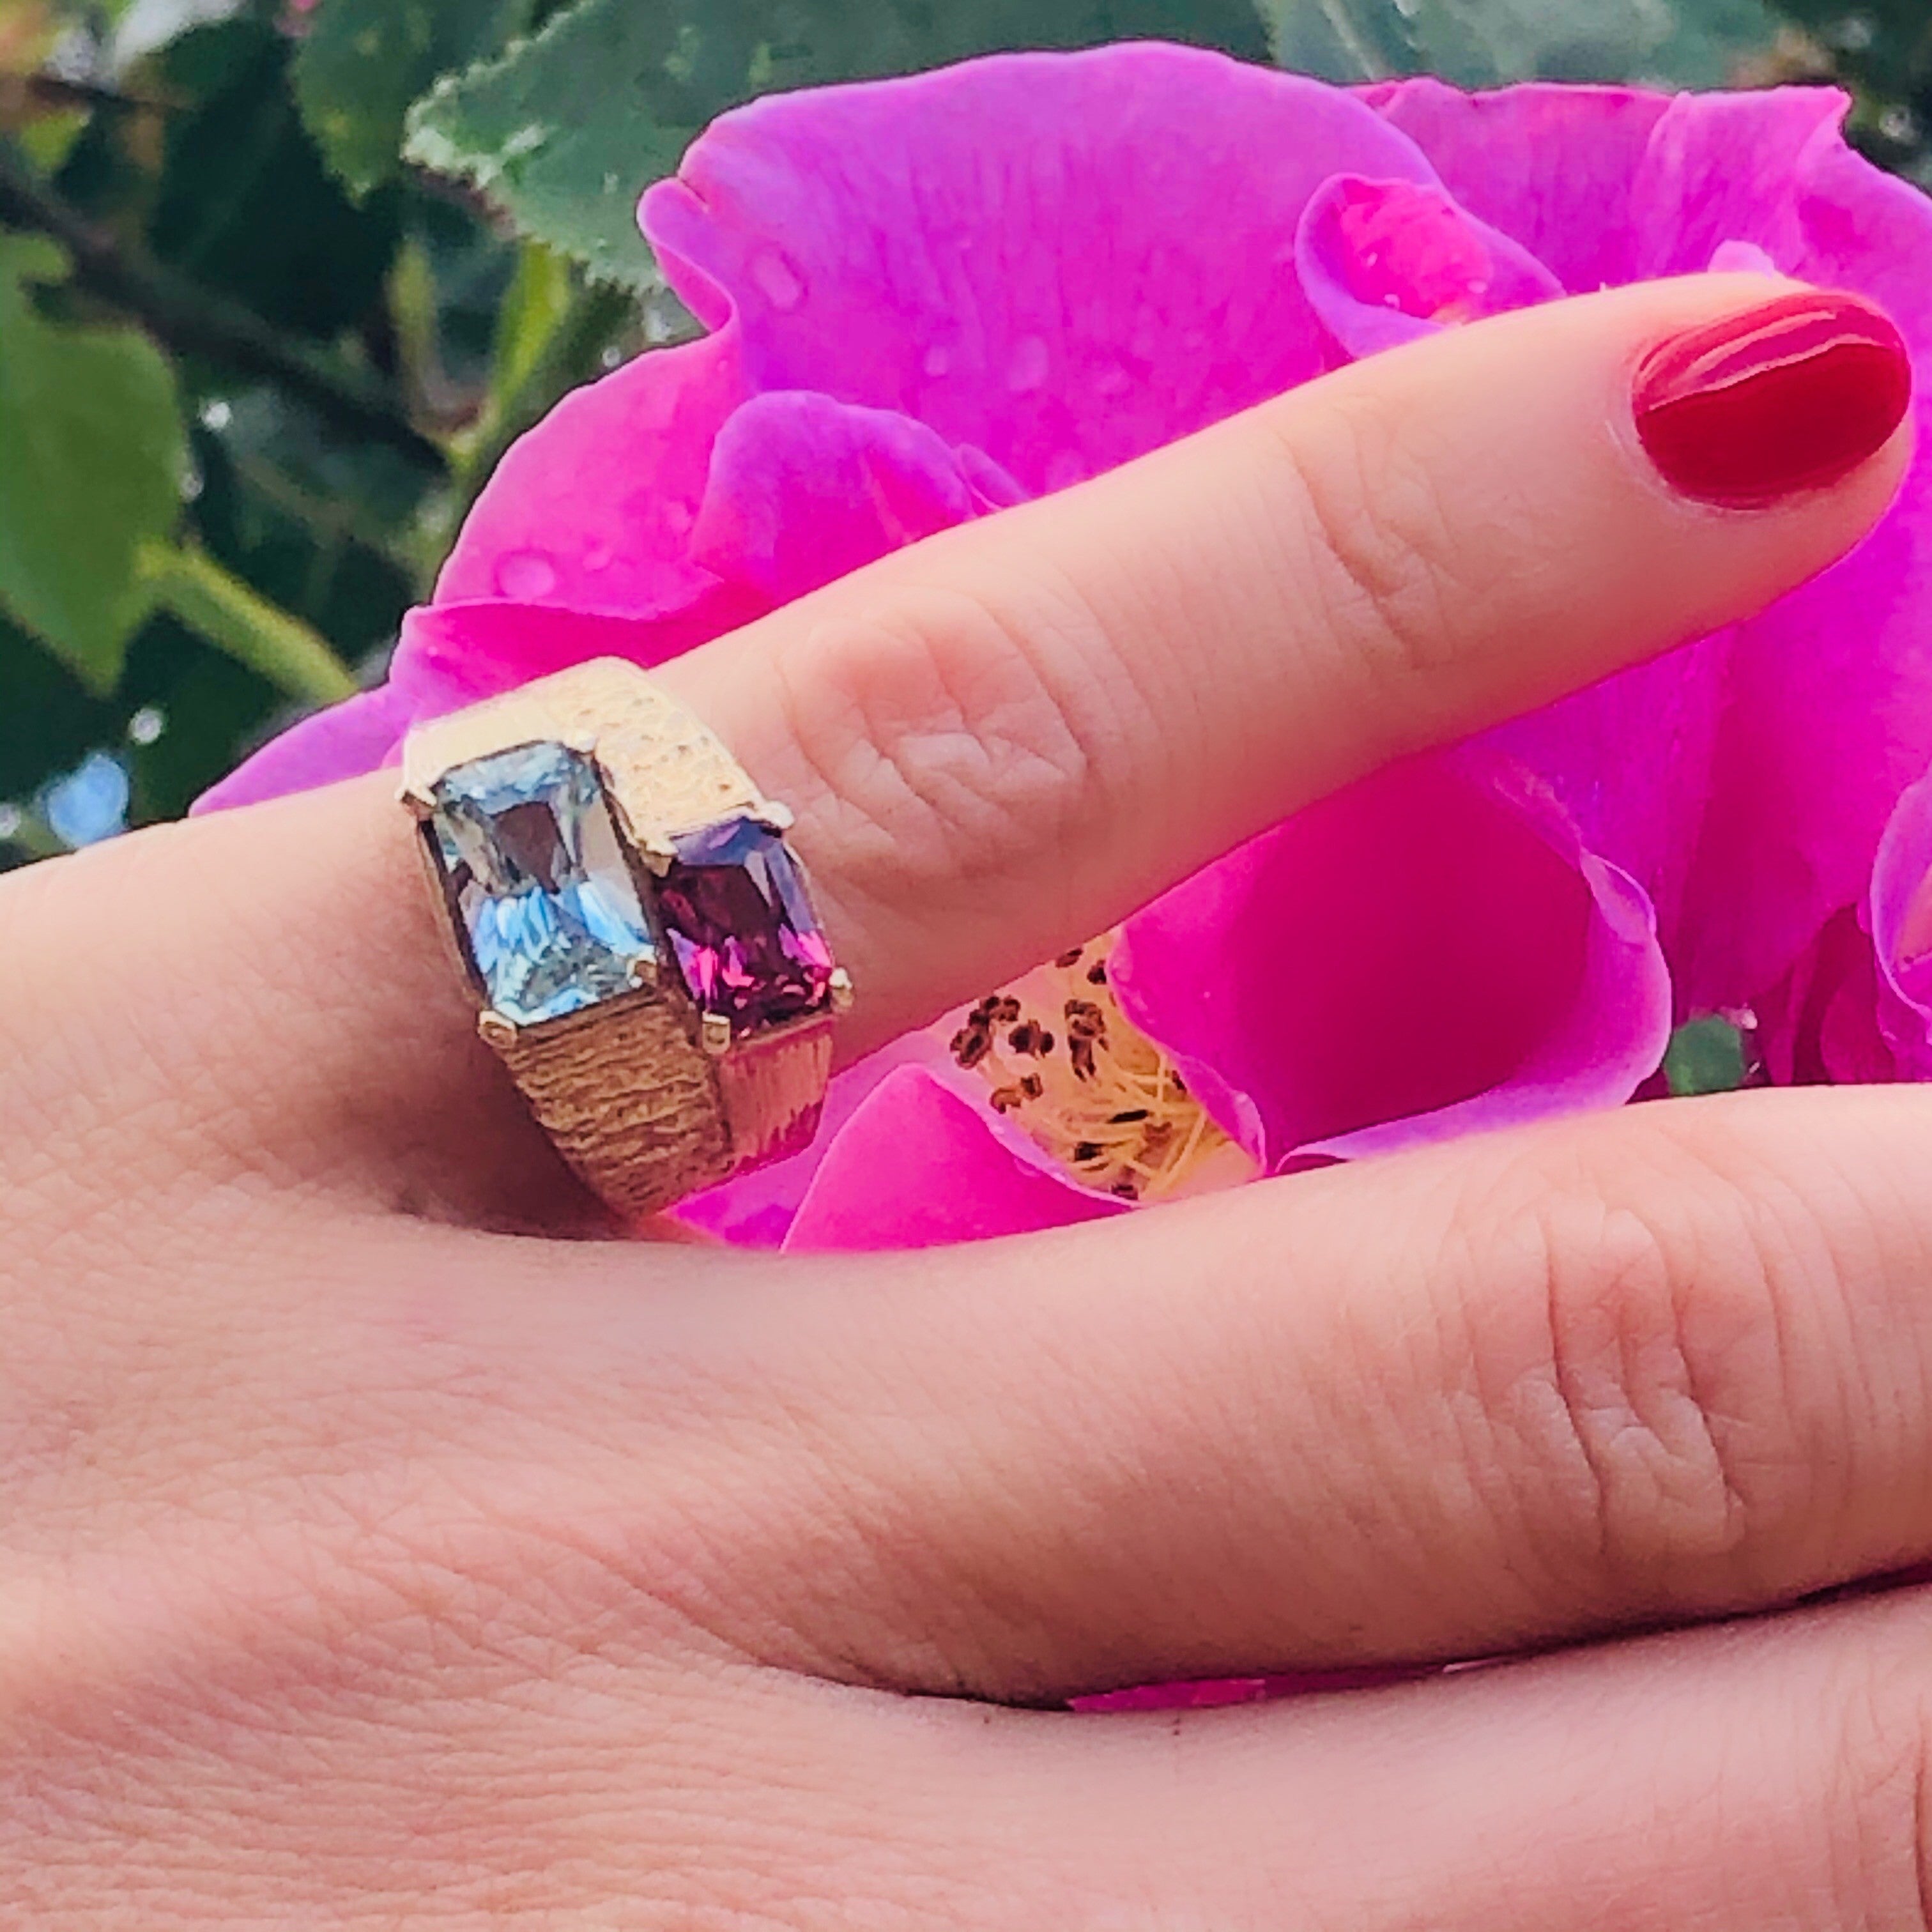 1970s Aquamarine and Pink Garnet Ring worn on models little finger. Models nail is painted red. Pink flower and green leaves in the background.